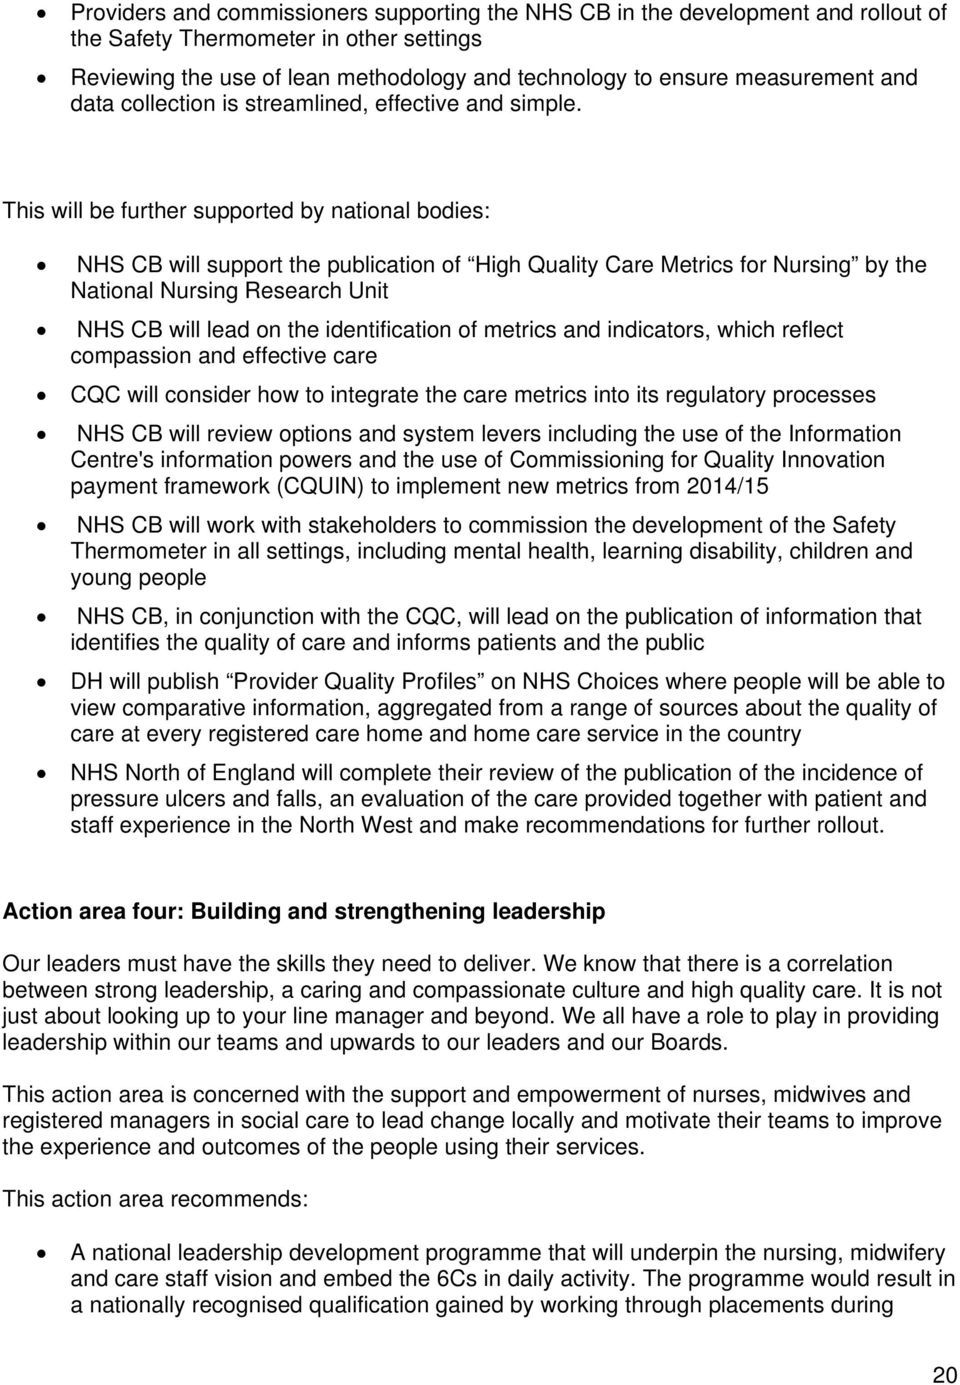 This will be further supported by national bodies: NHS CB will support the publication of High Quality Care Metrics for Nursing by the National Nursing Research Unit NHS CB will lead on the